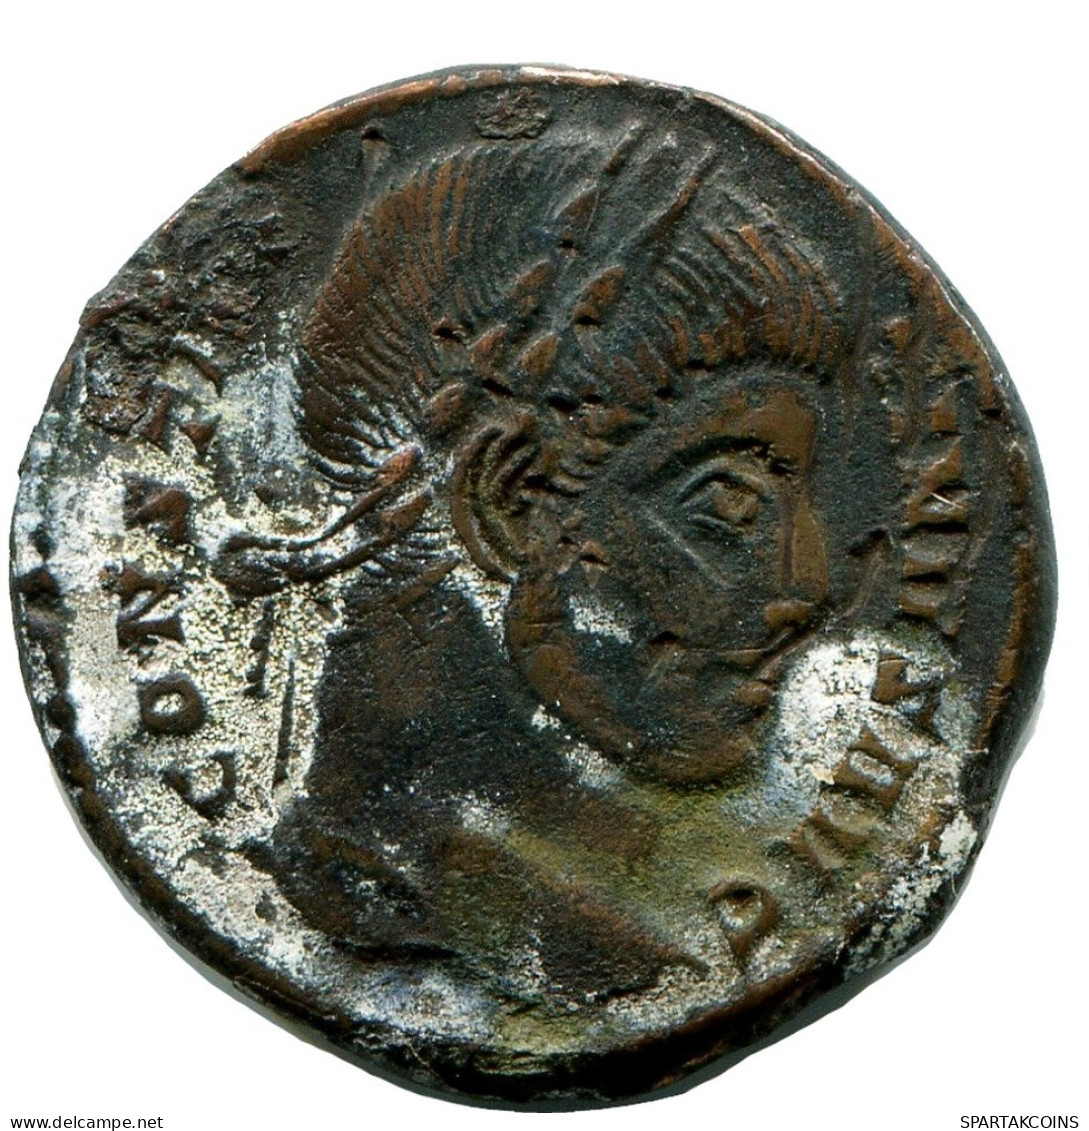 CONSTANTINE I MINTED IN TICINUM FROM THE ROYAL ONTARIO MUSEUM #ANC11079.14.F.A - El Impero Christiano (307 / 363)